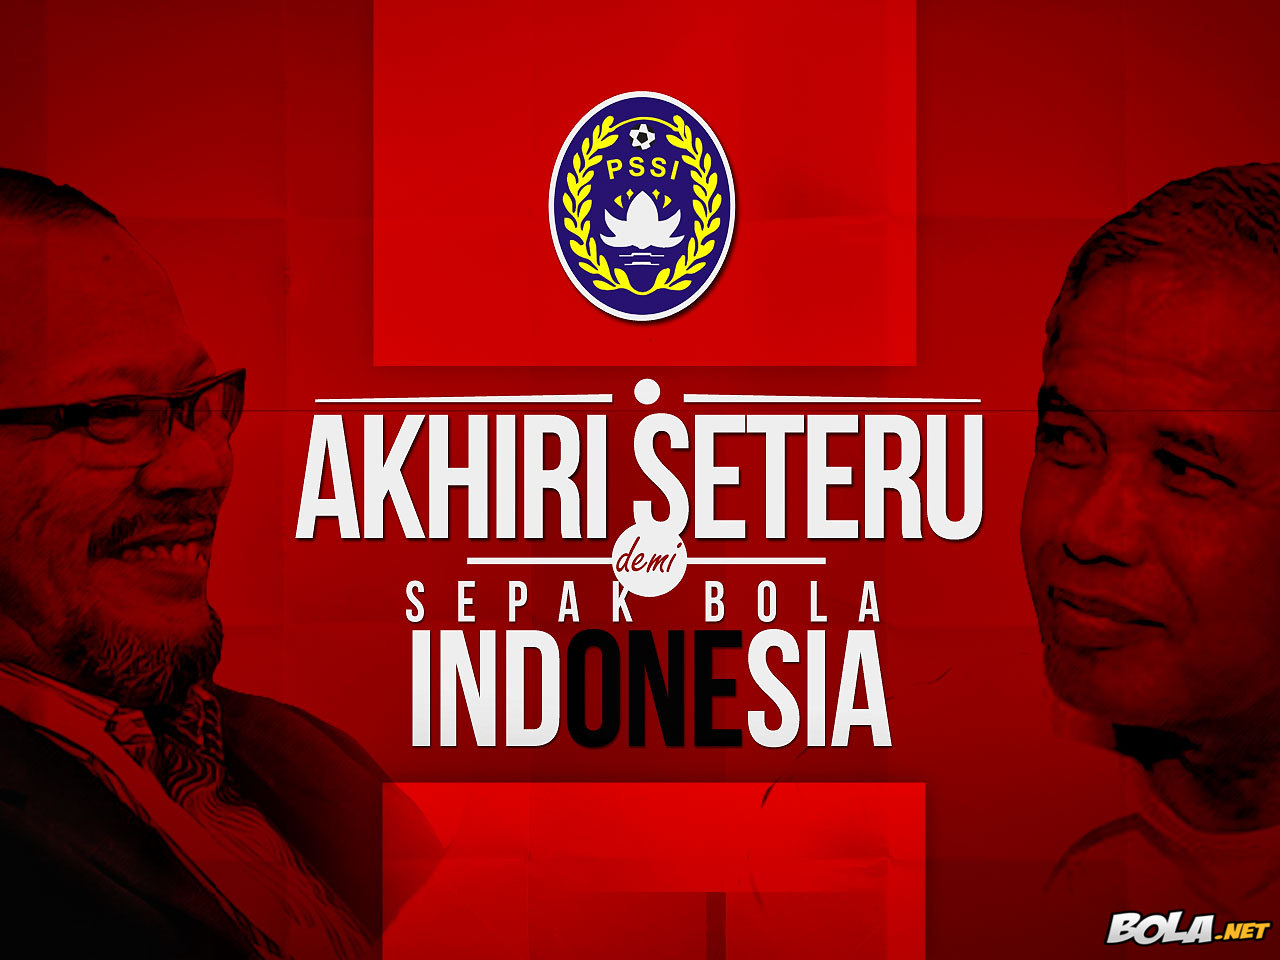 Download Wallpaper Indonesia Bolanet